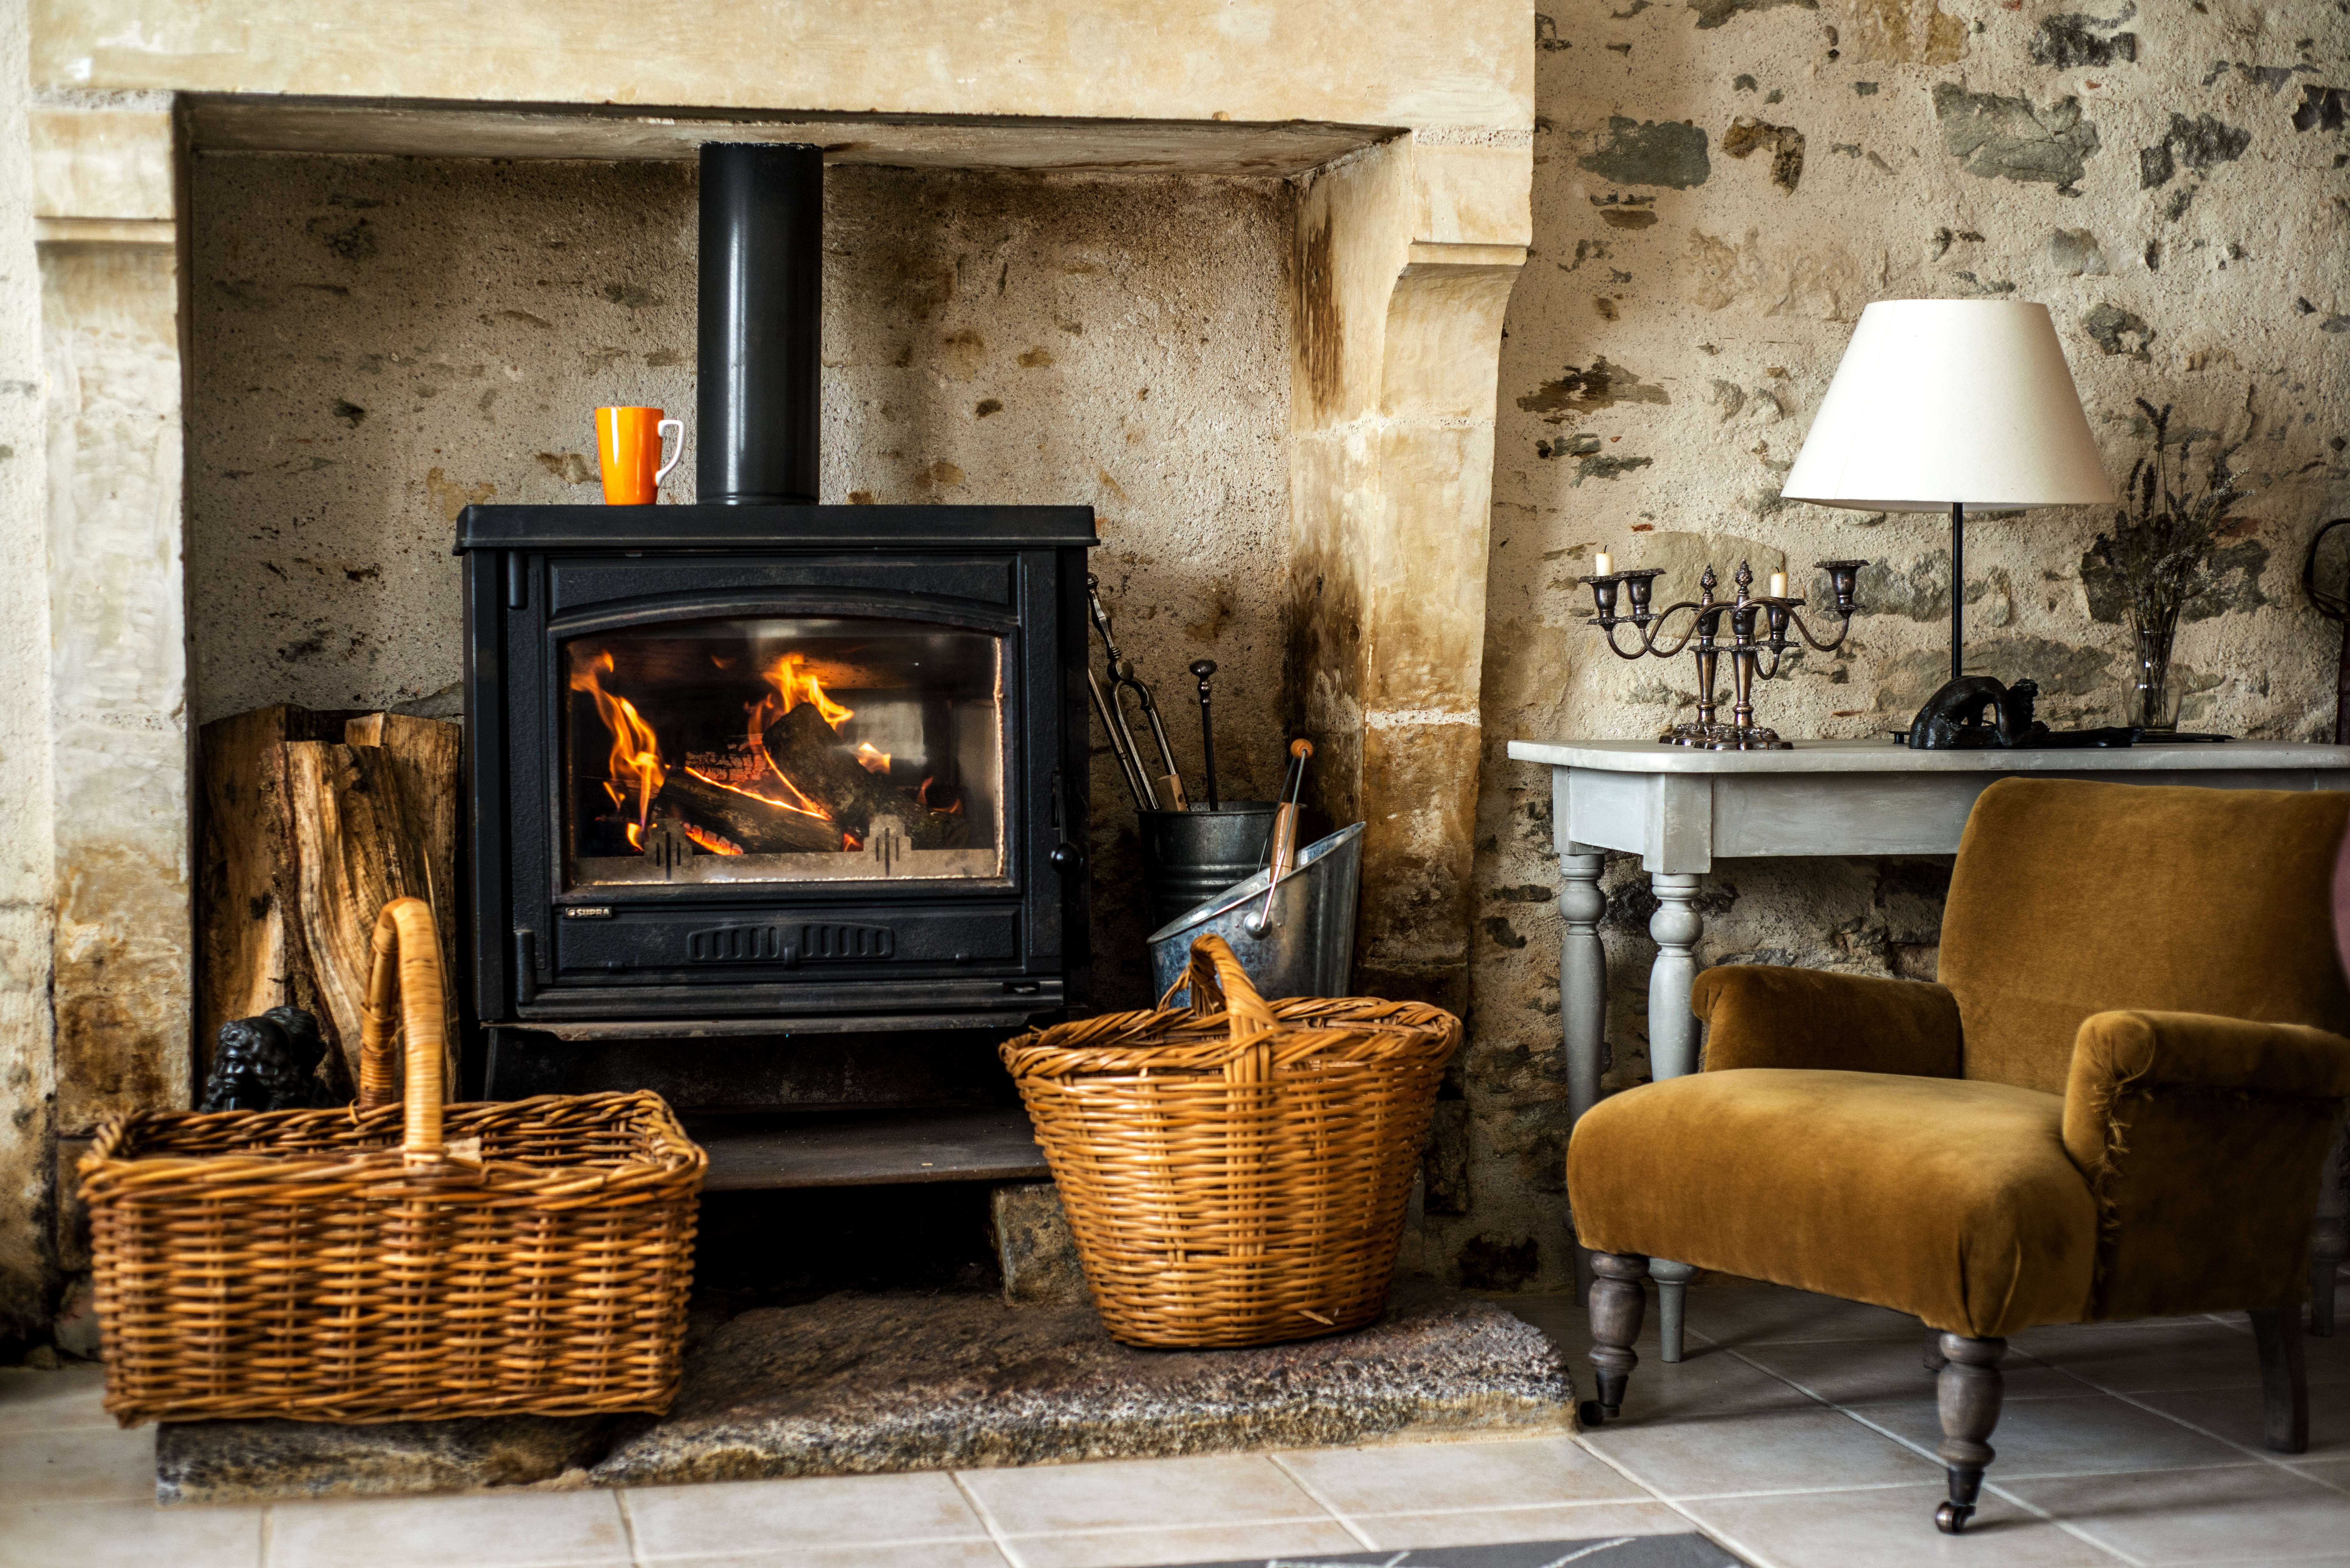 House Smells Like Smoke From Fireplace Luxury How to Adjust Wood Stove Vents Home Guides